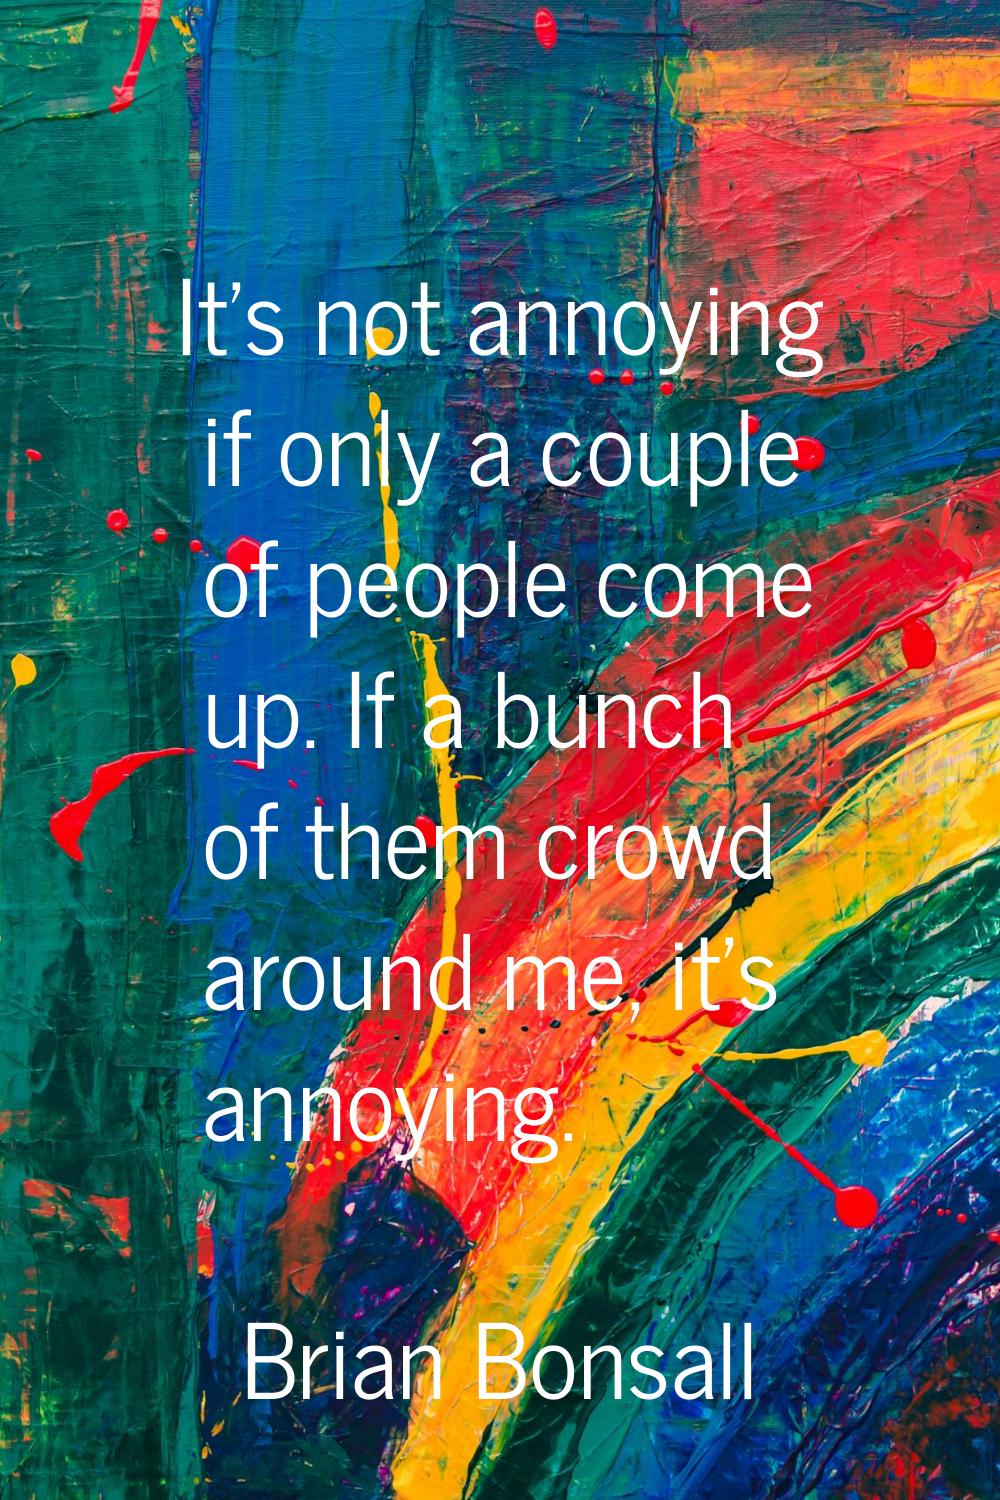 It's not annoying if only a couple of people come up. If a bunch of them crowd around me, it's anno